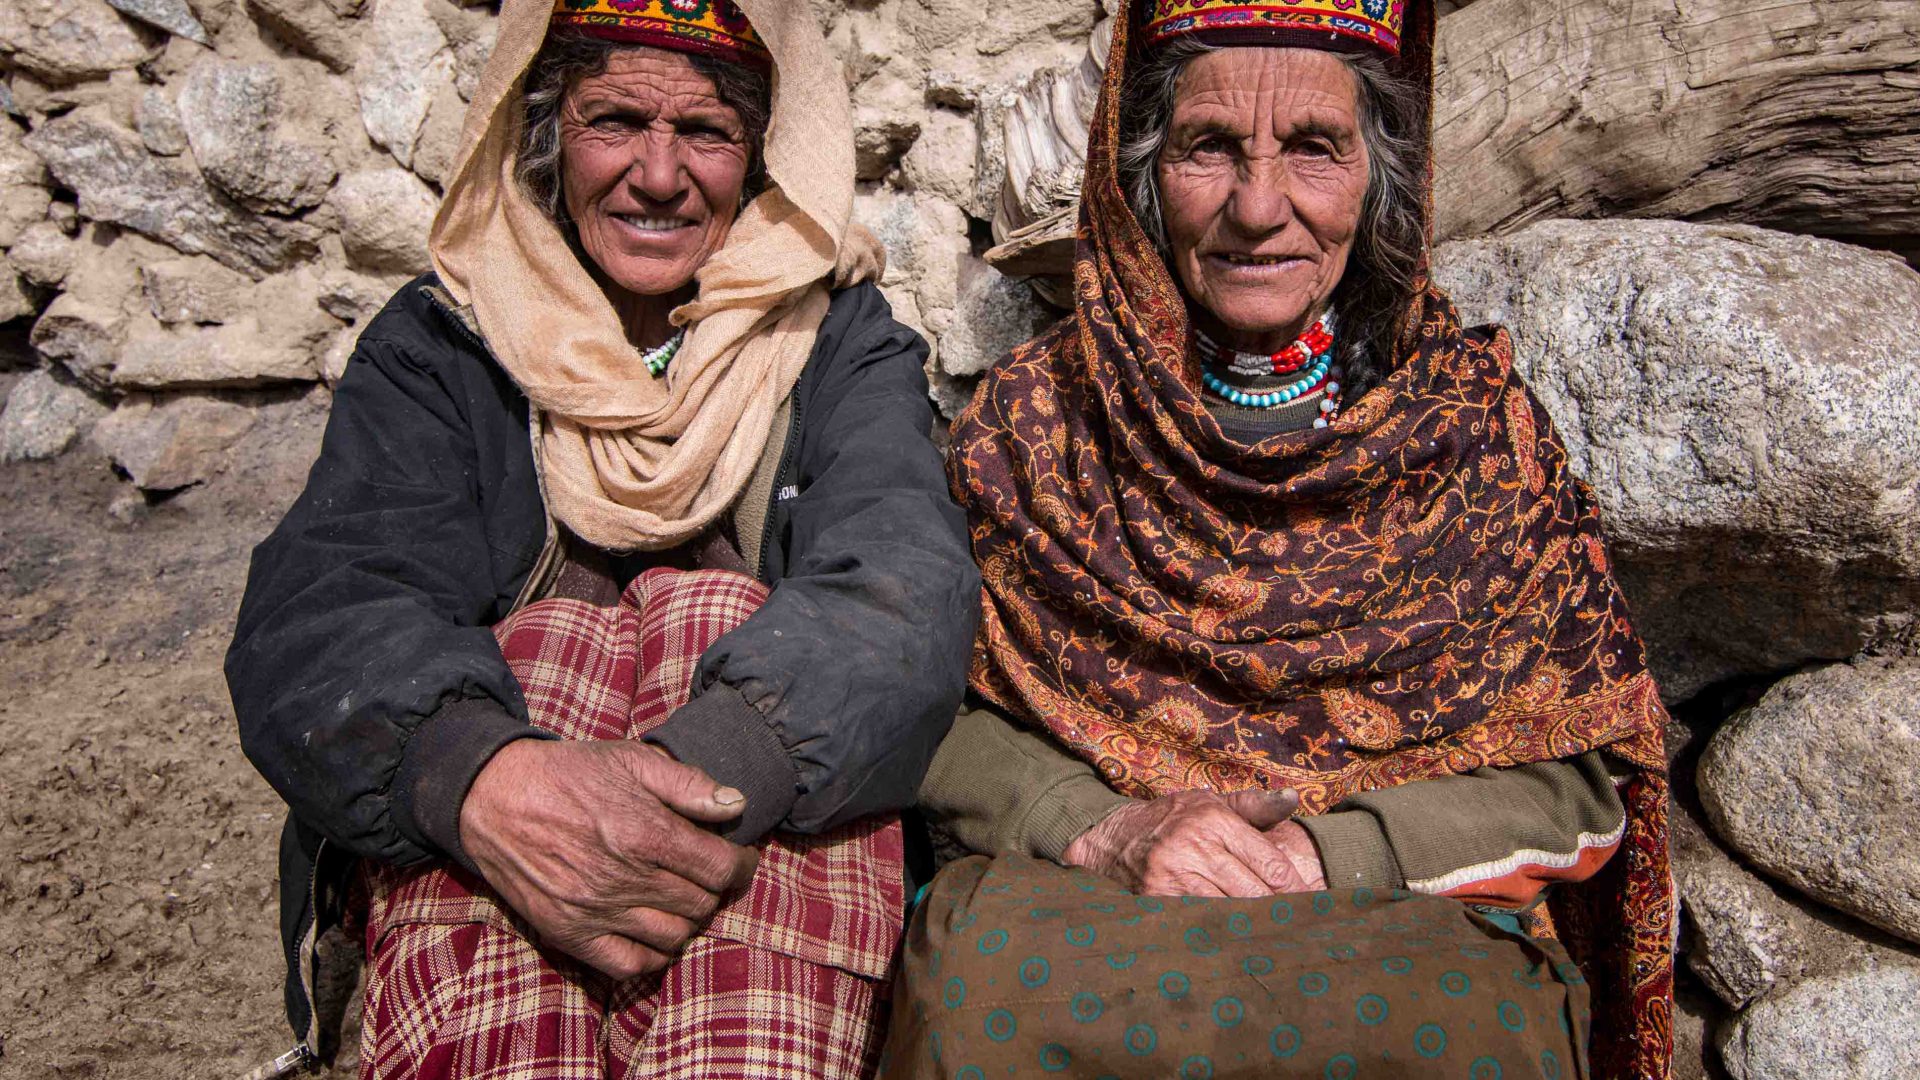 Pok Doman, left, and Nar Begum, right, are among the oldest shepherdesses in the region.